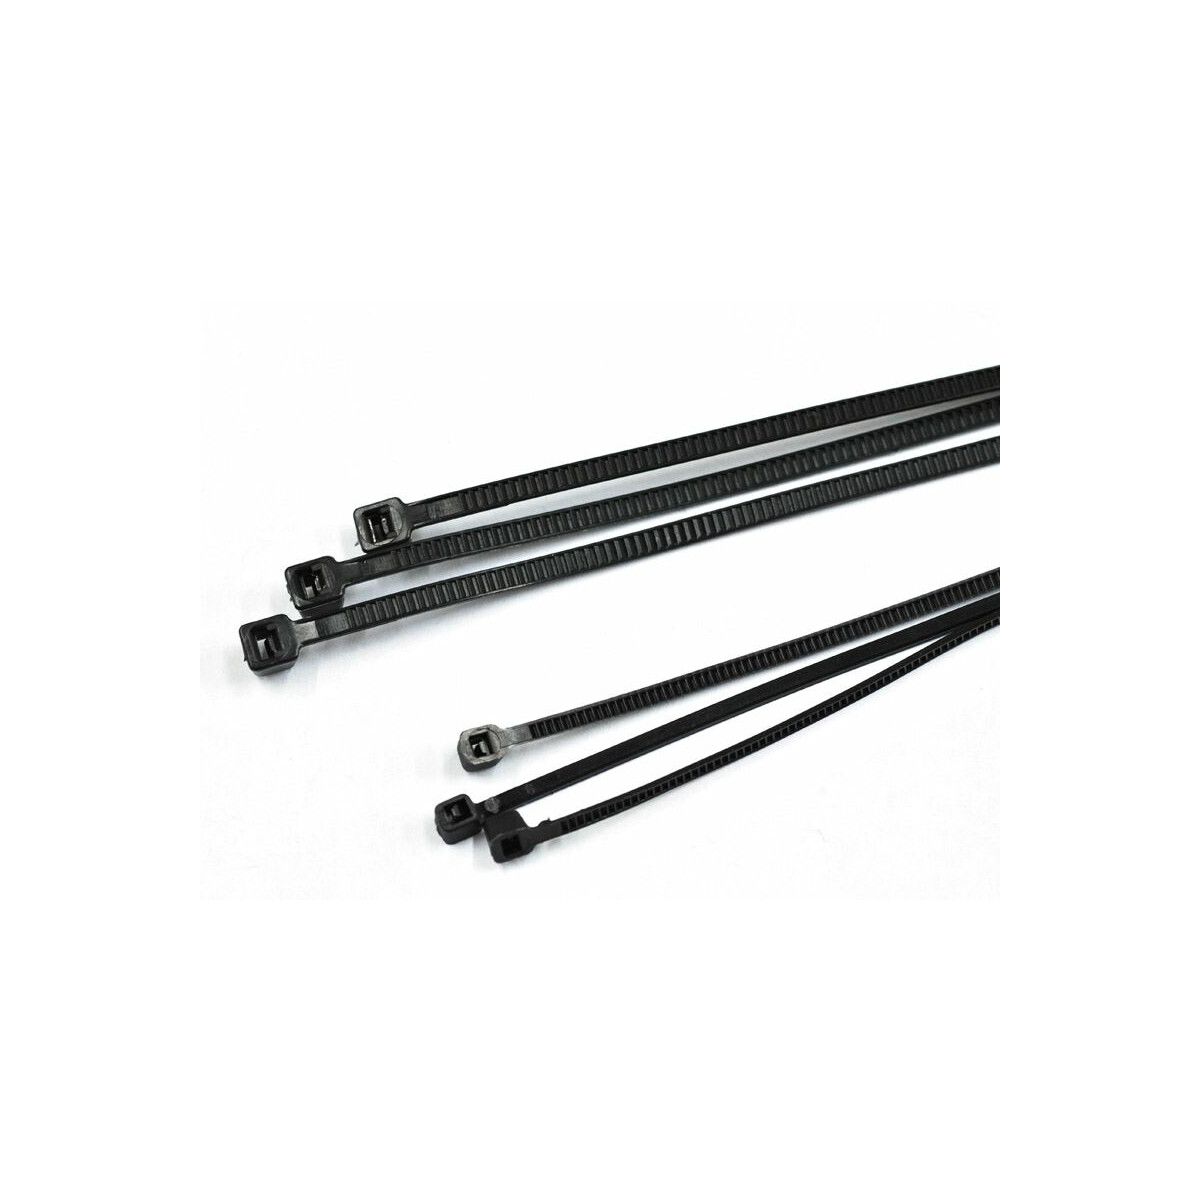 OXY3 - Cable Ties Set